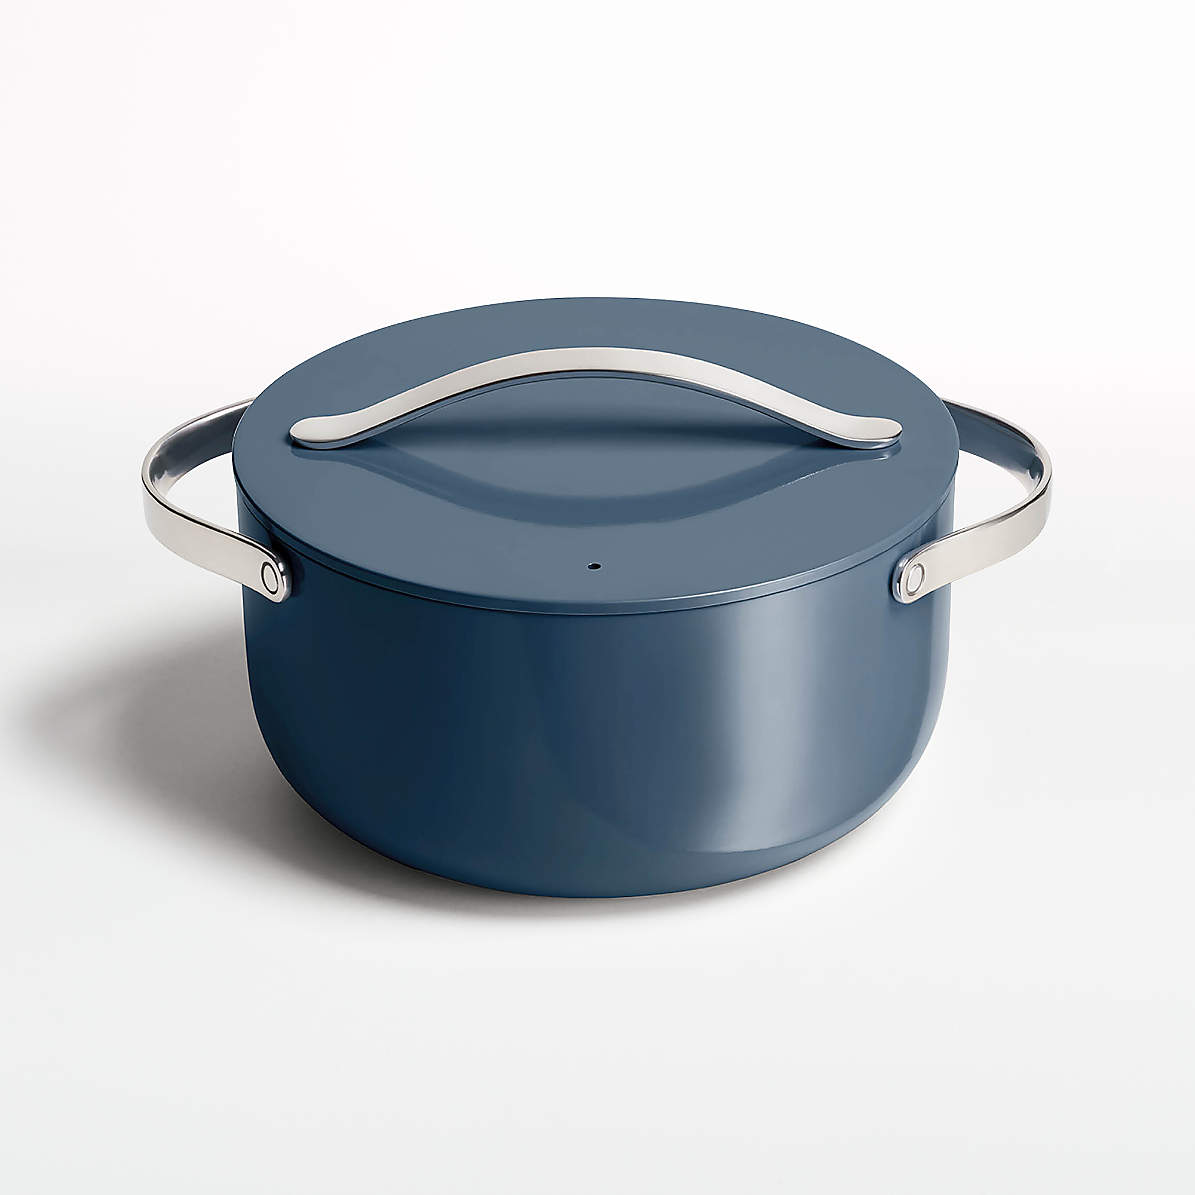 Caraway Nonstick Ceramic Dutch Oven Pot with Lid (6.5 qt, 10.5) - Non  Toxic, PTFE & PFOA Free - Oven Safe & Compatible with All Stovetops (Gas